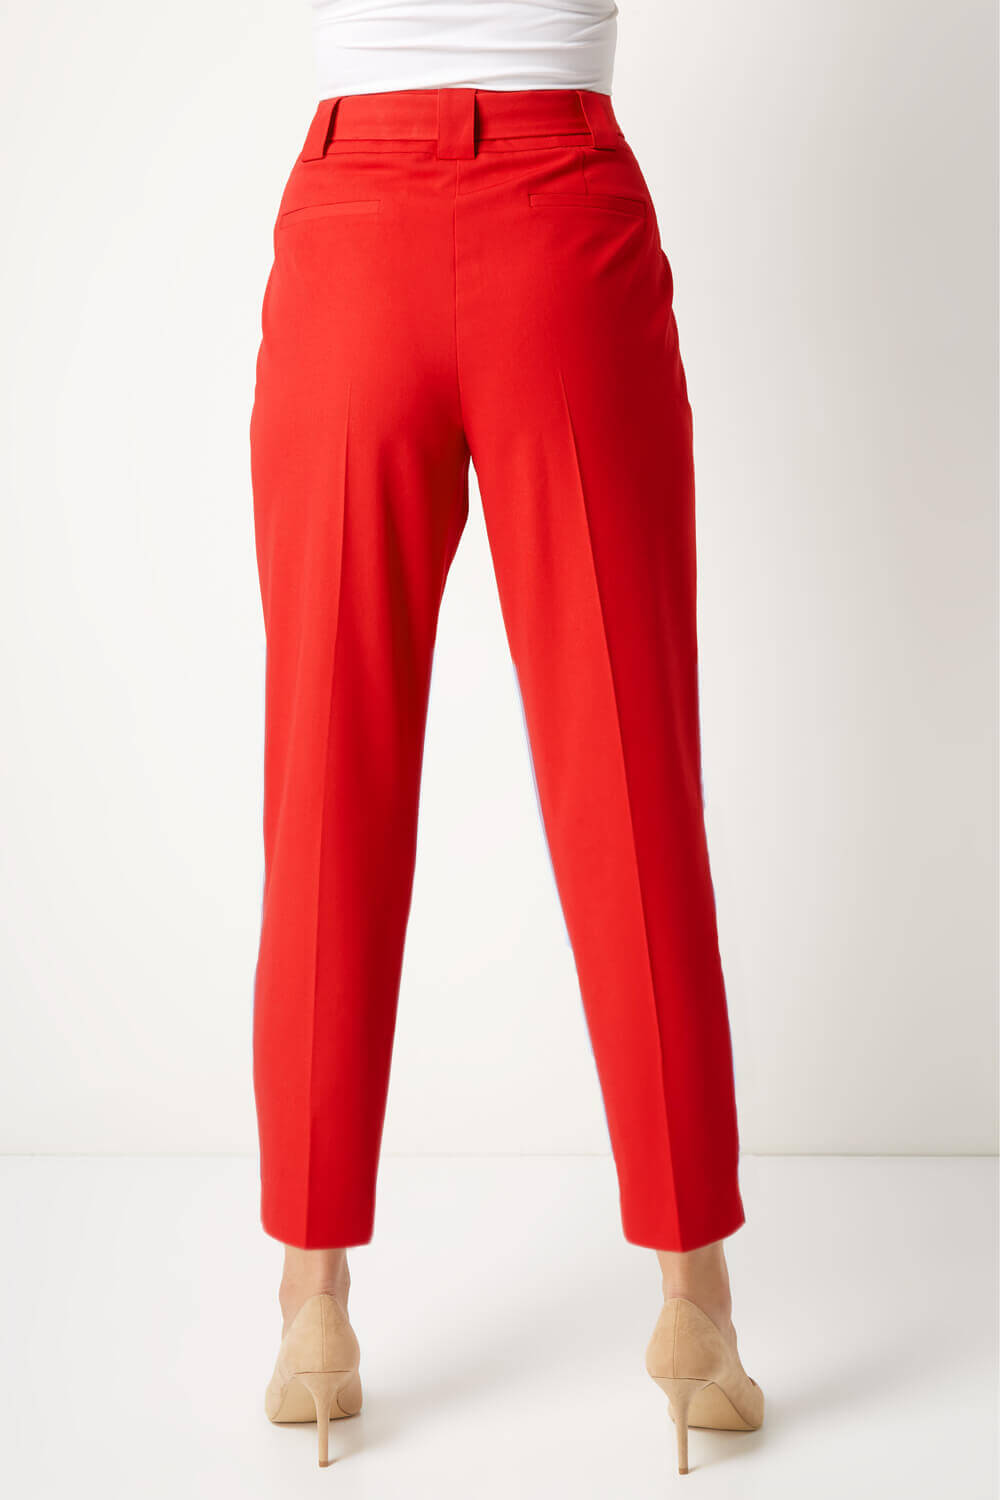 Belted Tapered Trousers in RED - Roman Originals UK